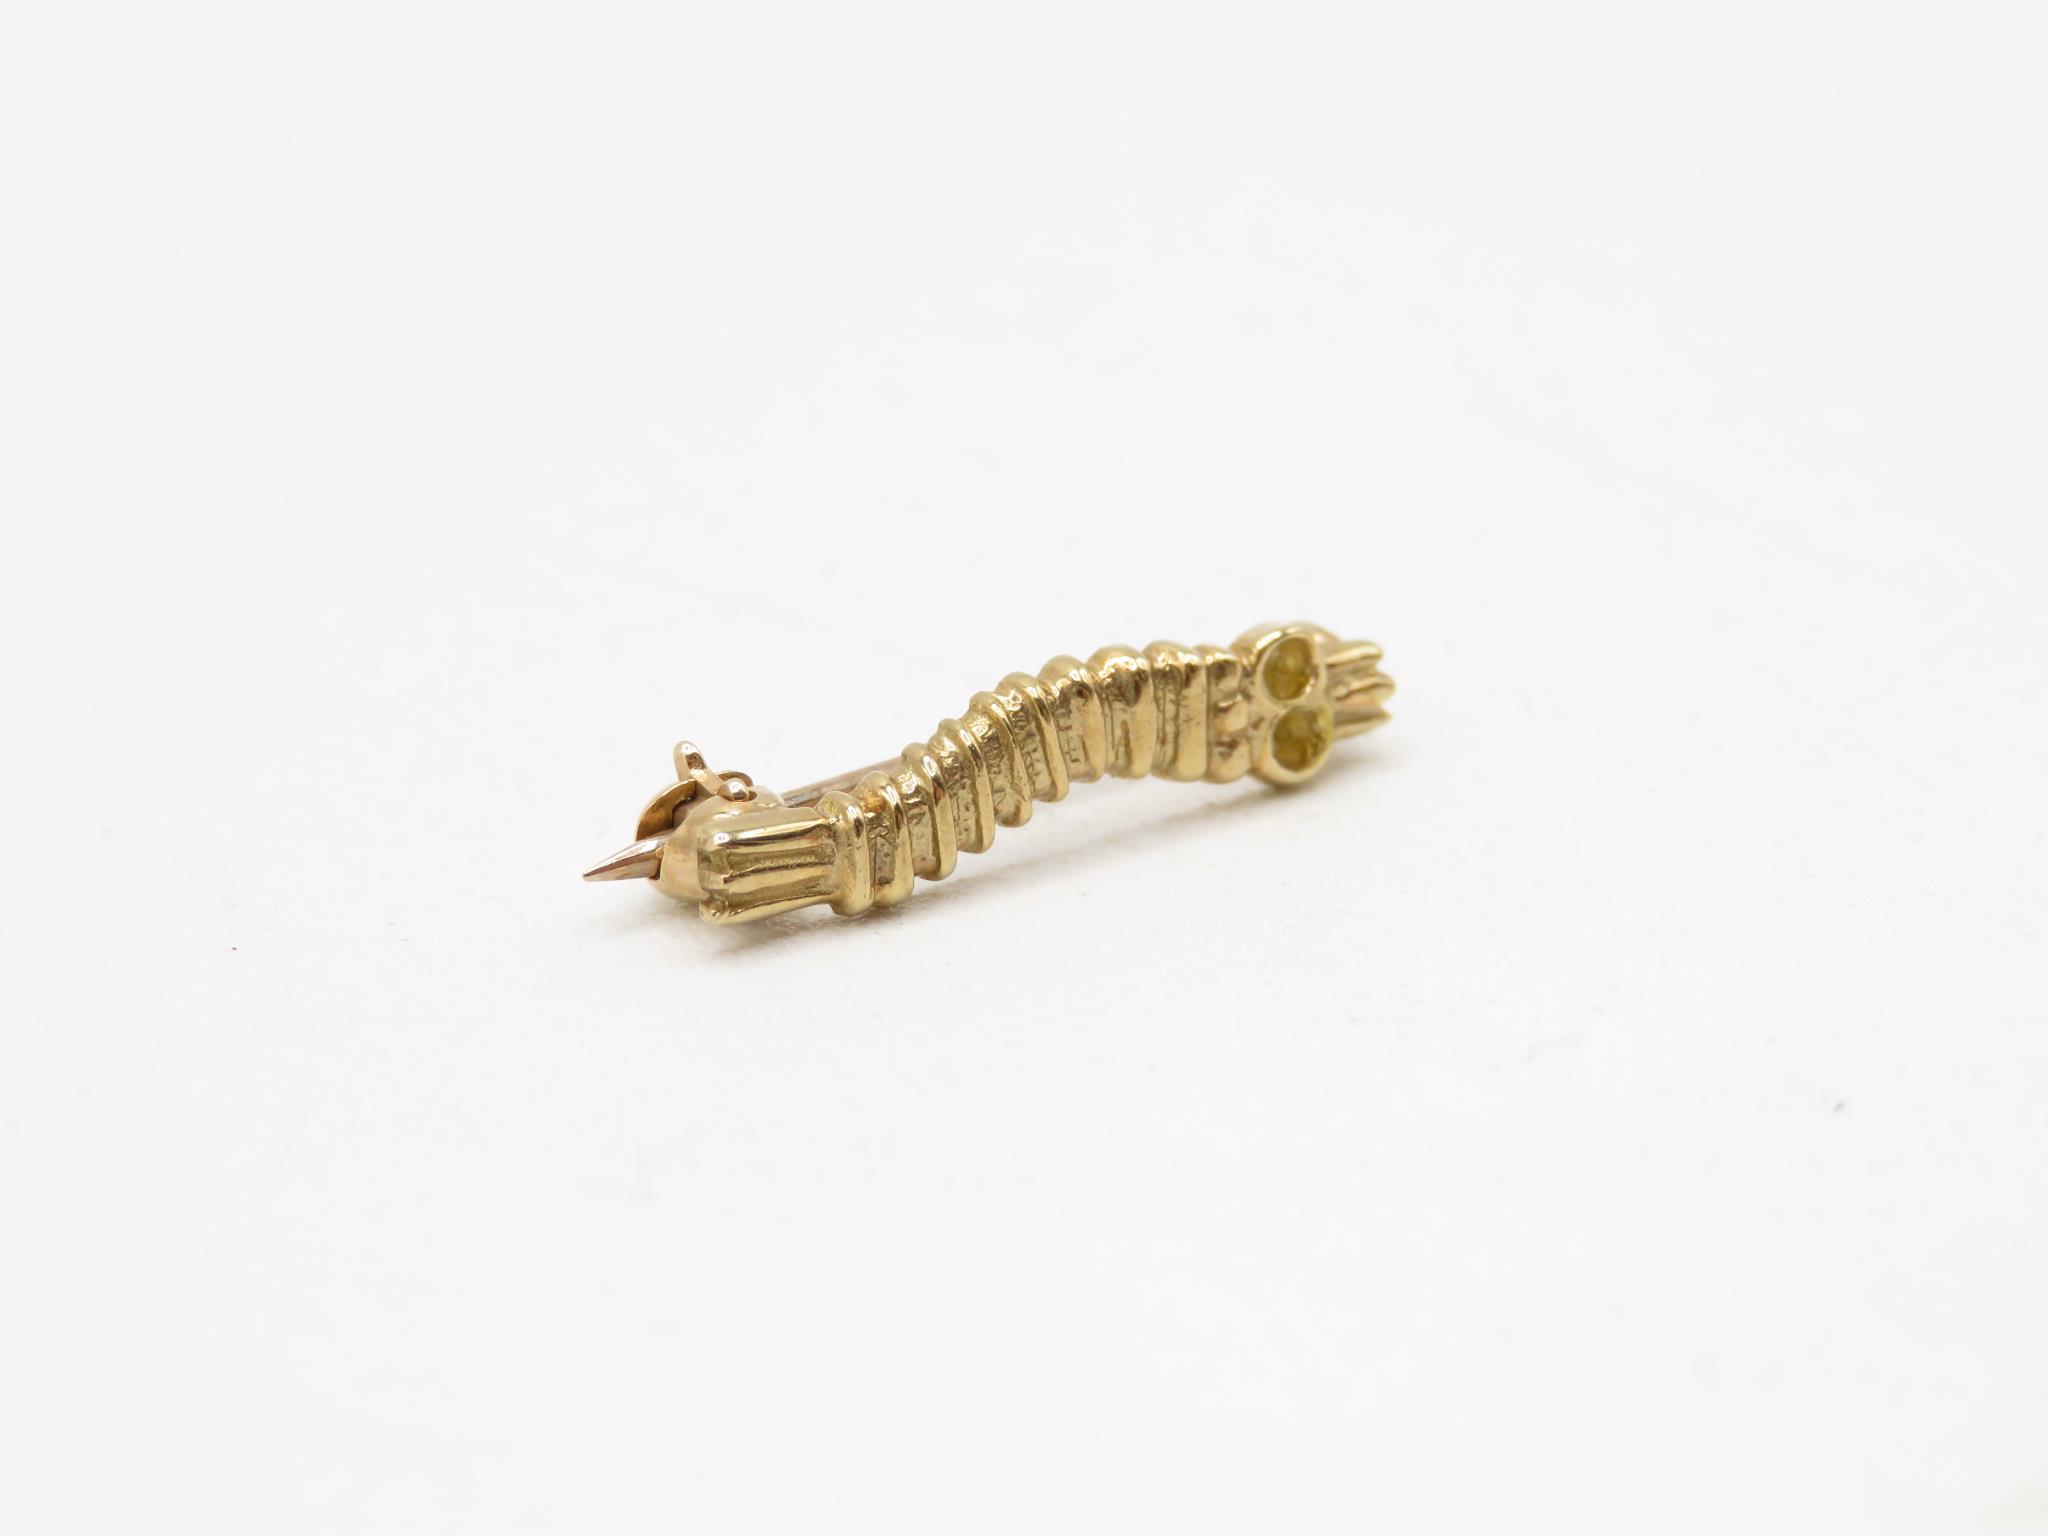 Original gold Caterpillar Club brooch to J Borderson awarded by Caterpillar Club for Parachute - Image 2 of 4